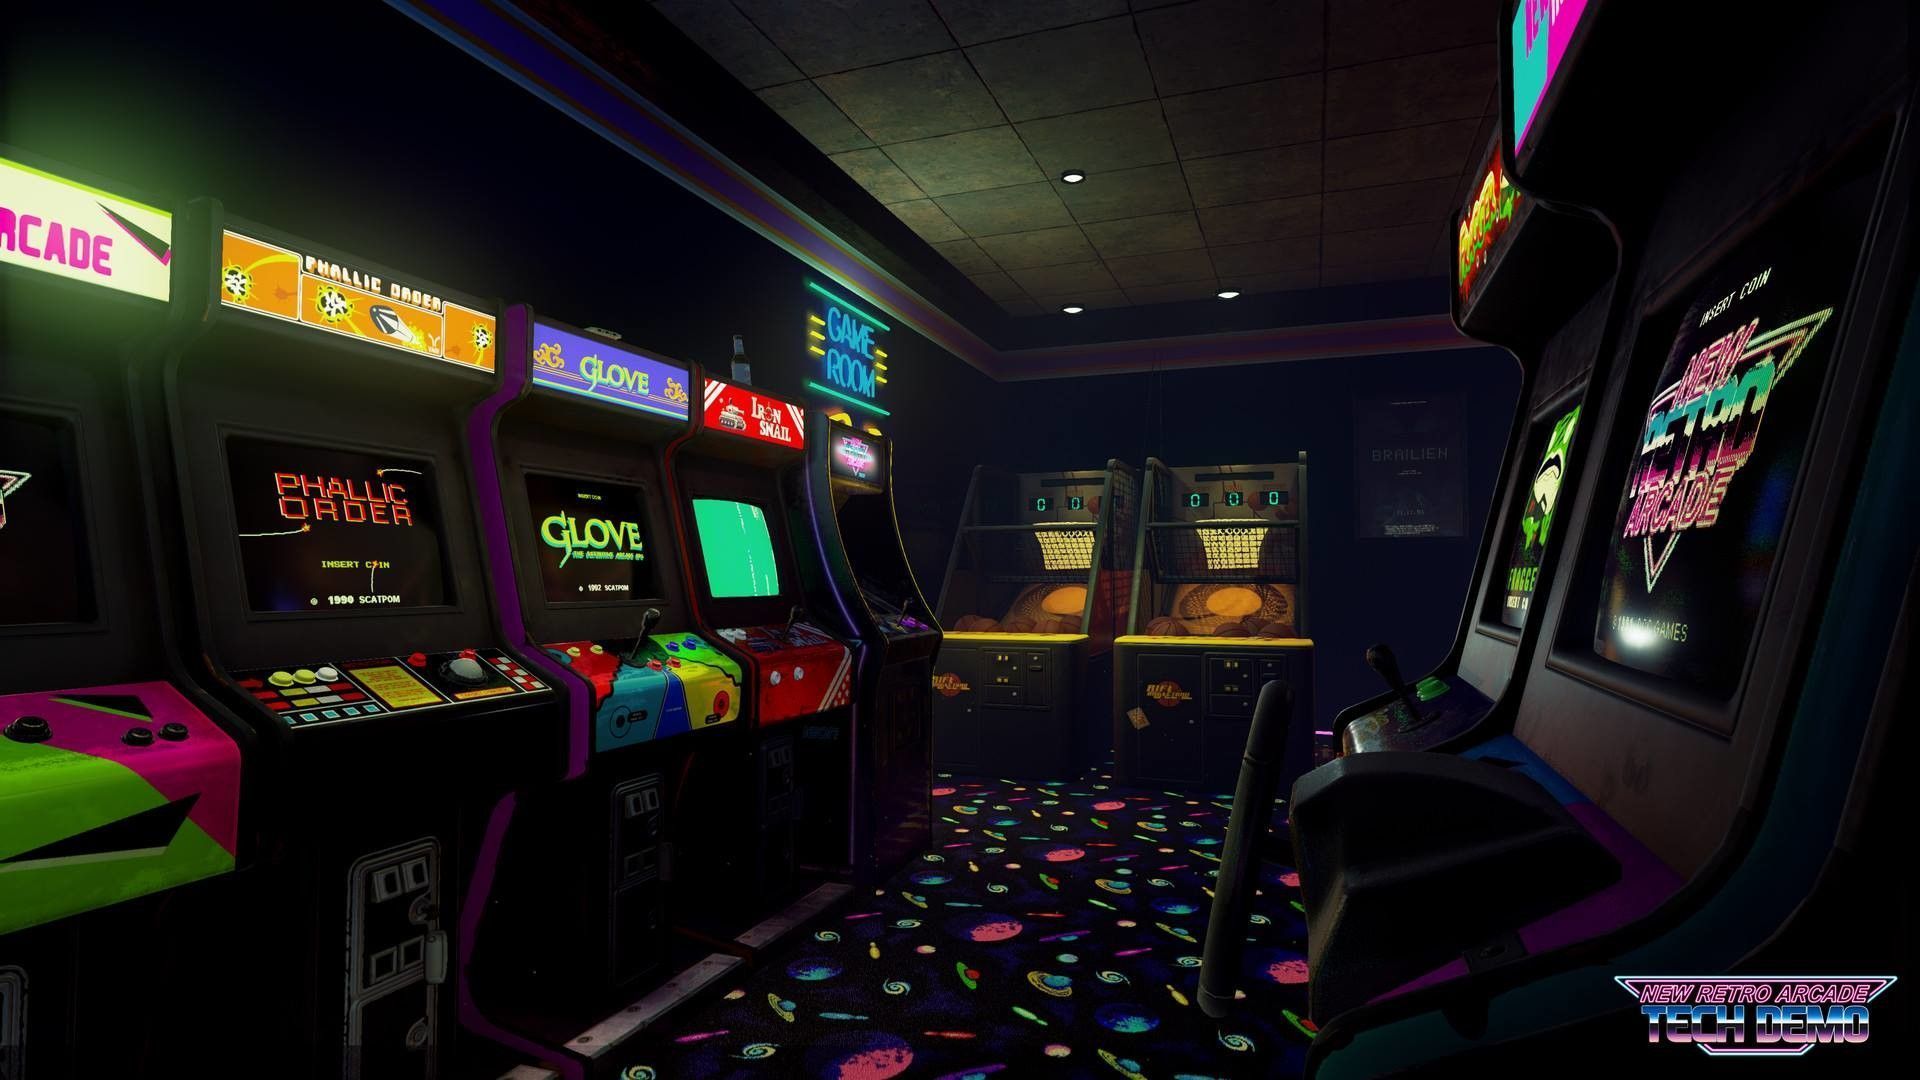 A room with many different arcade games - Arcade